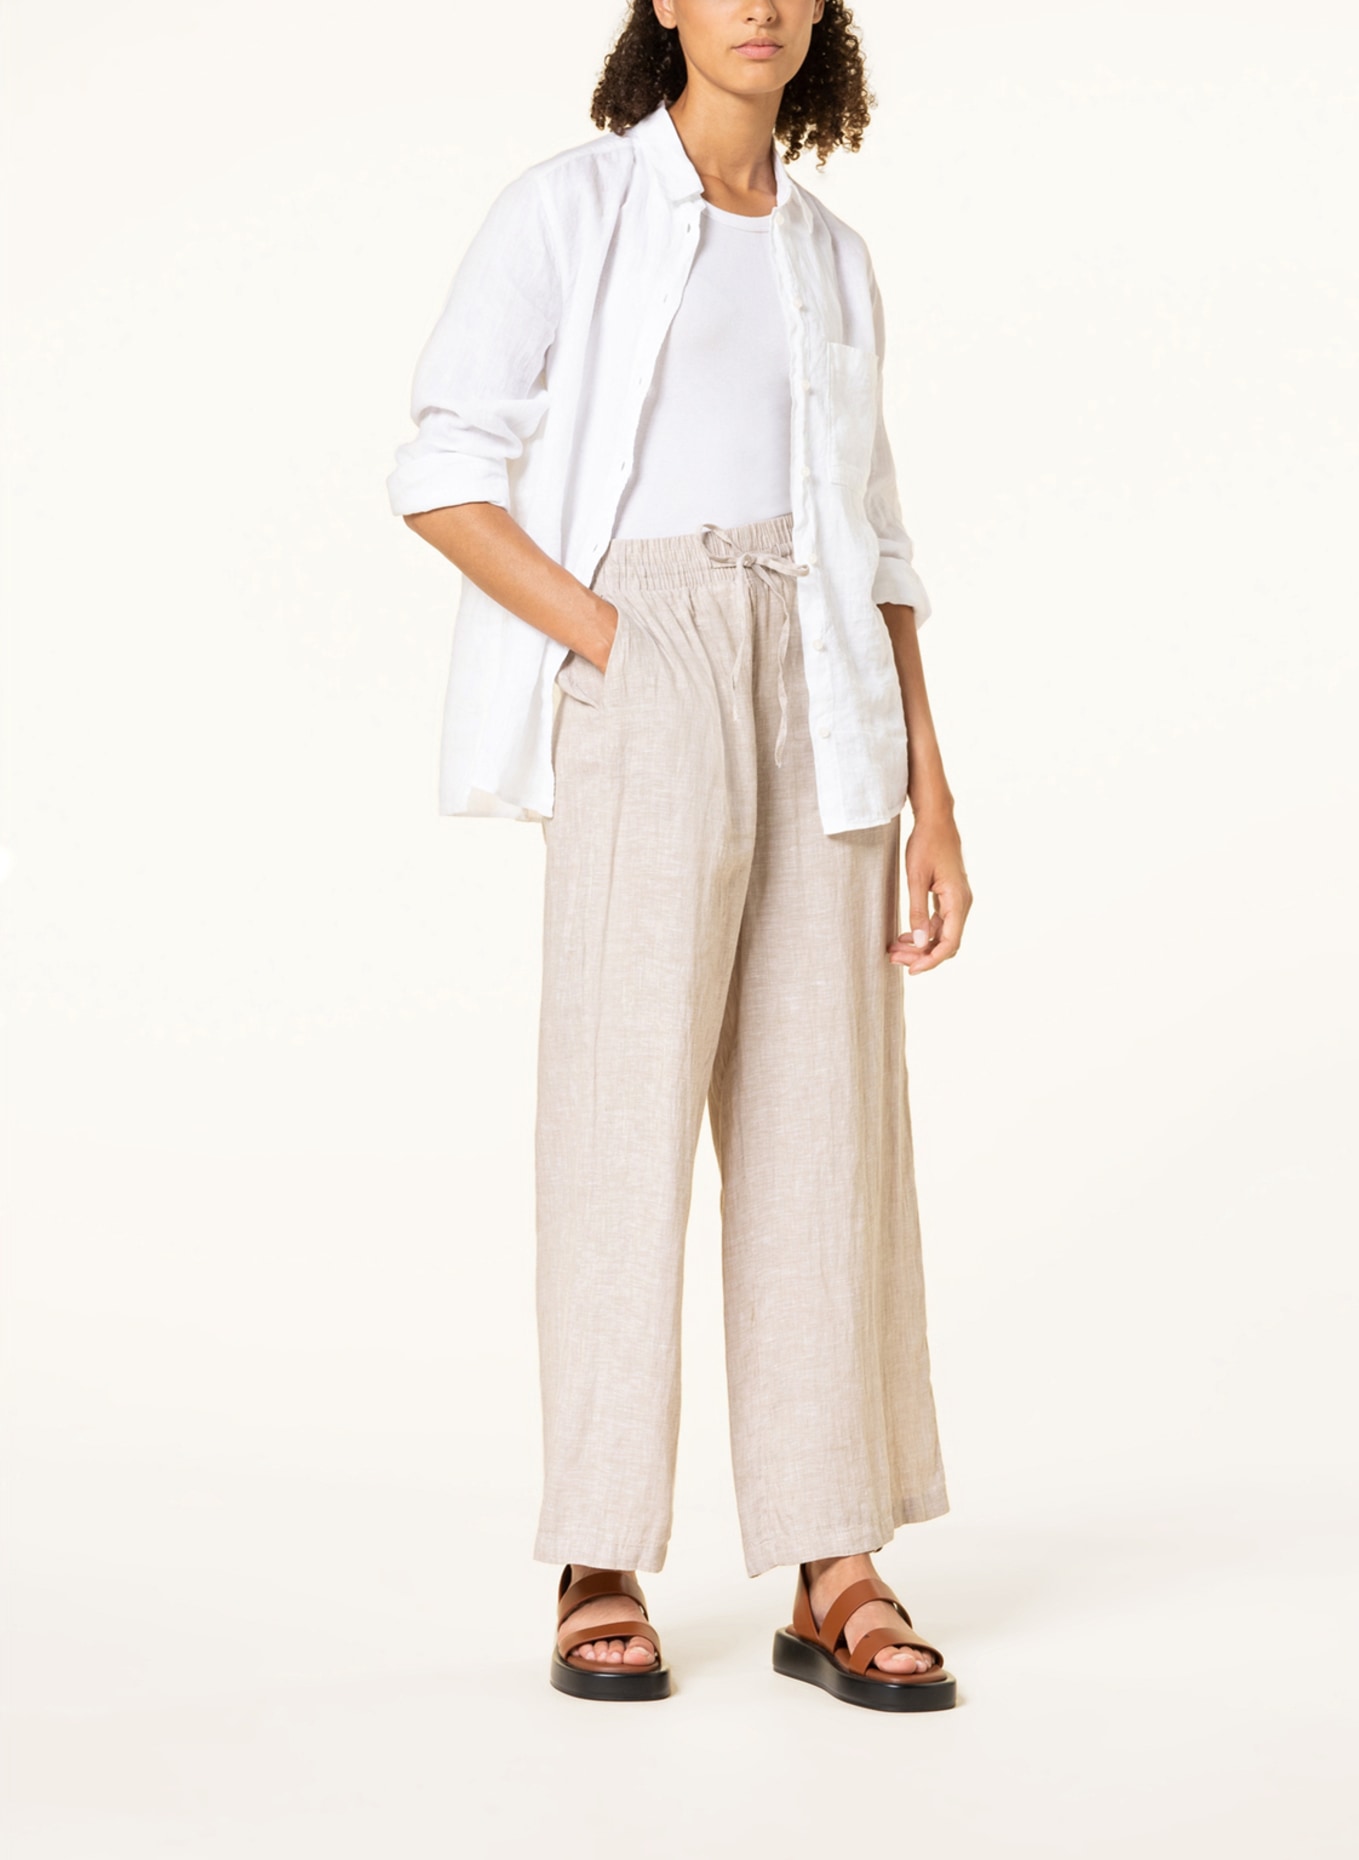 Gina Tricot Linen Blend Trousers - Clothing - Boozt.com